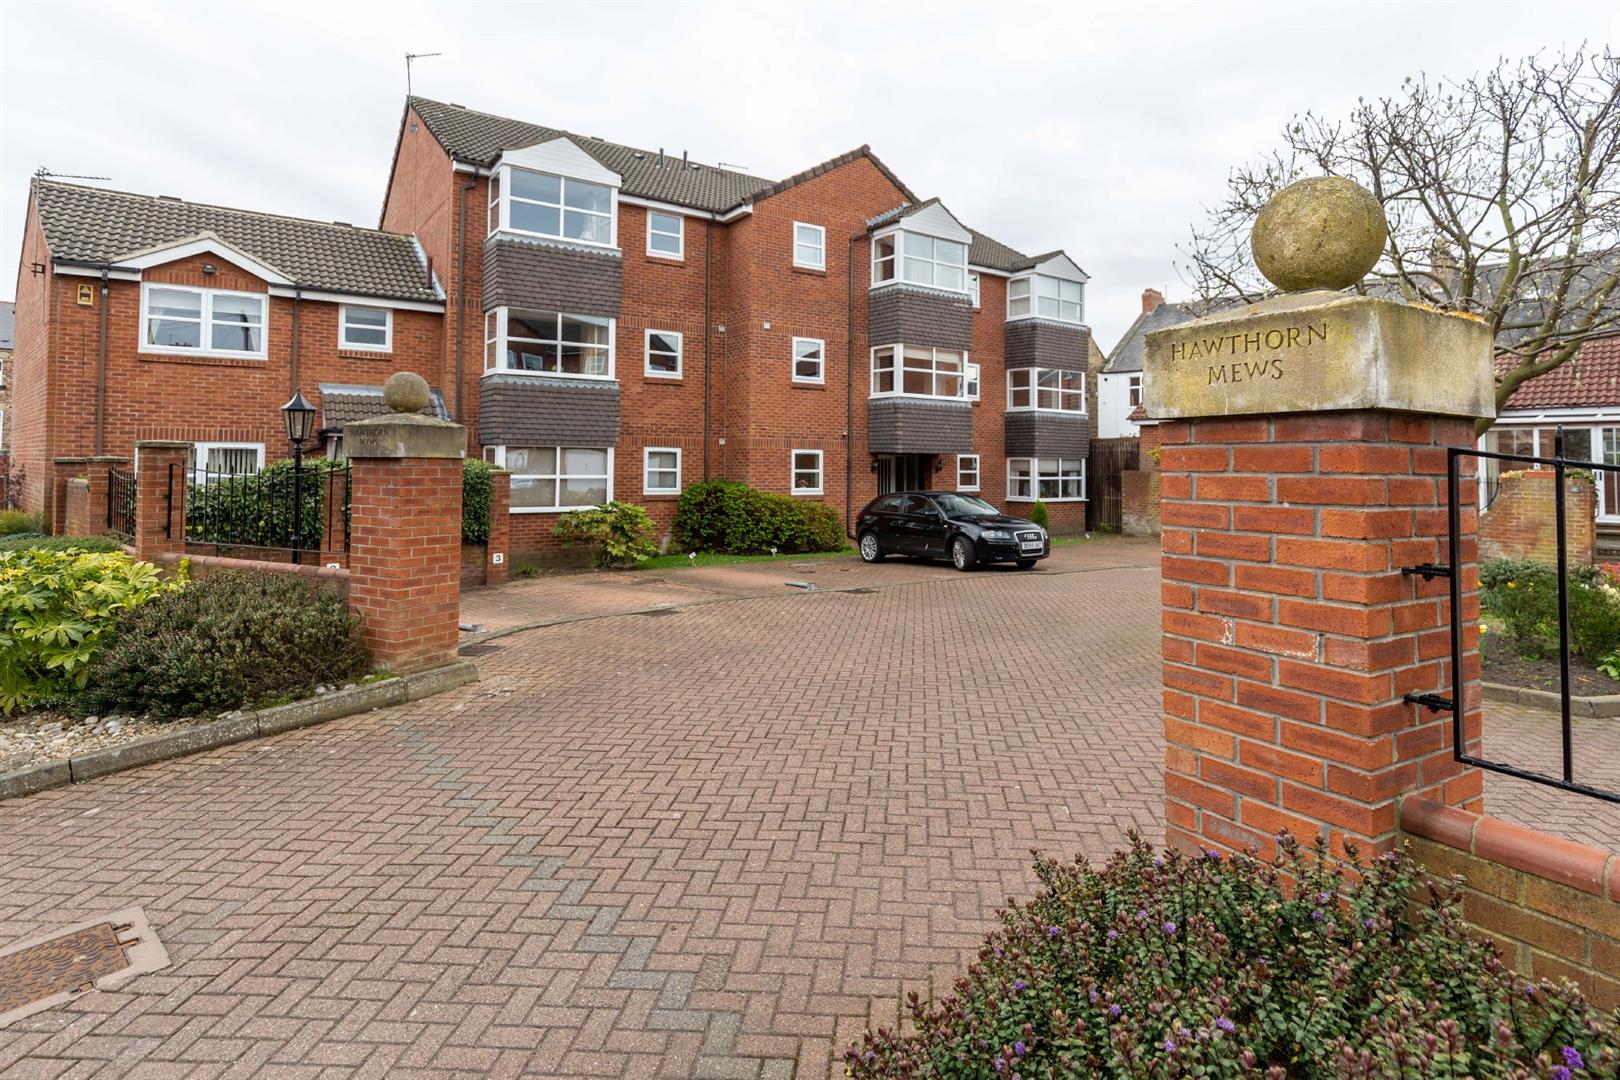 2 bed apartment to rent in Hawthorn Mews, Gosforth - Property Image 1